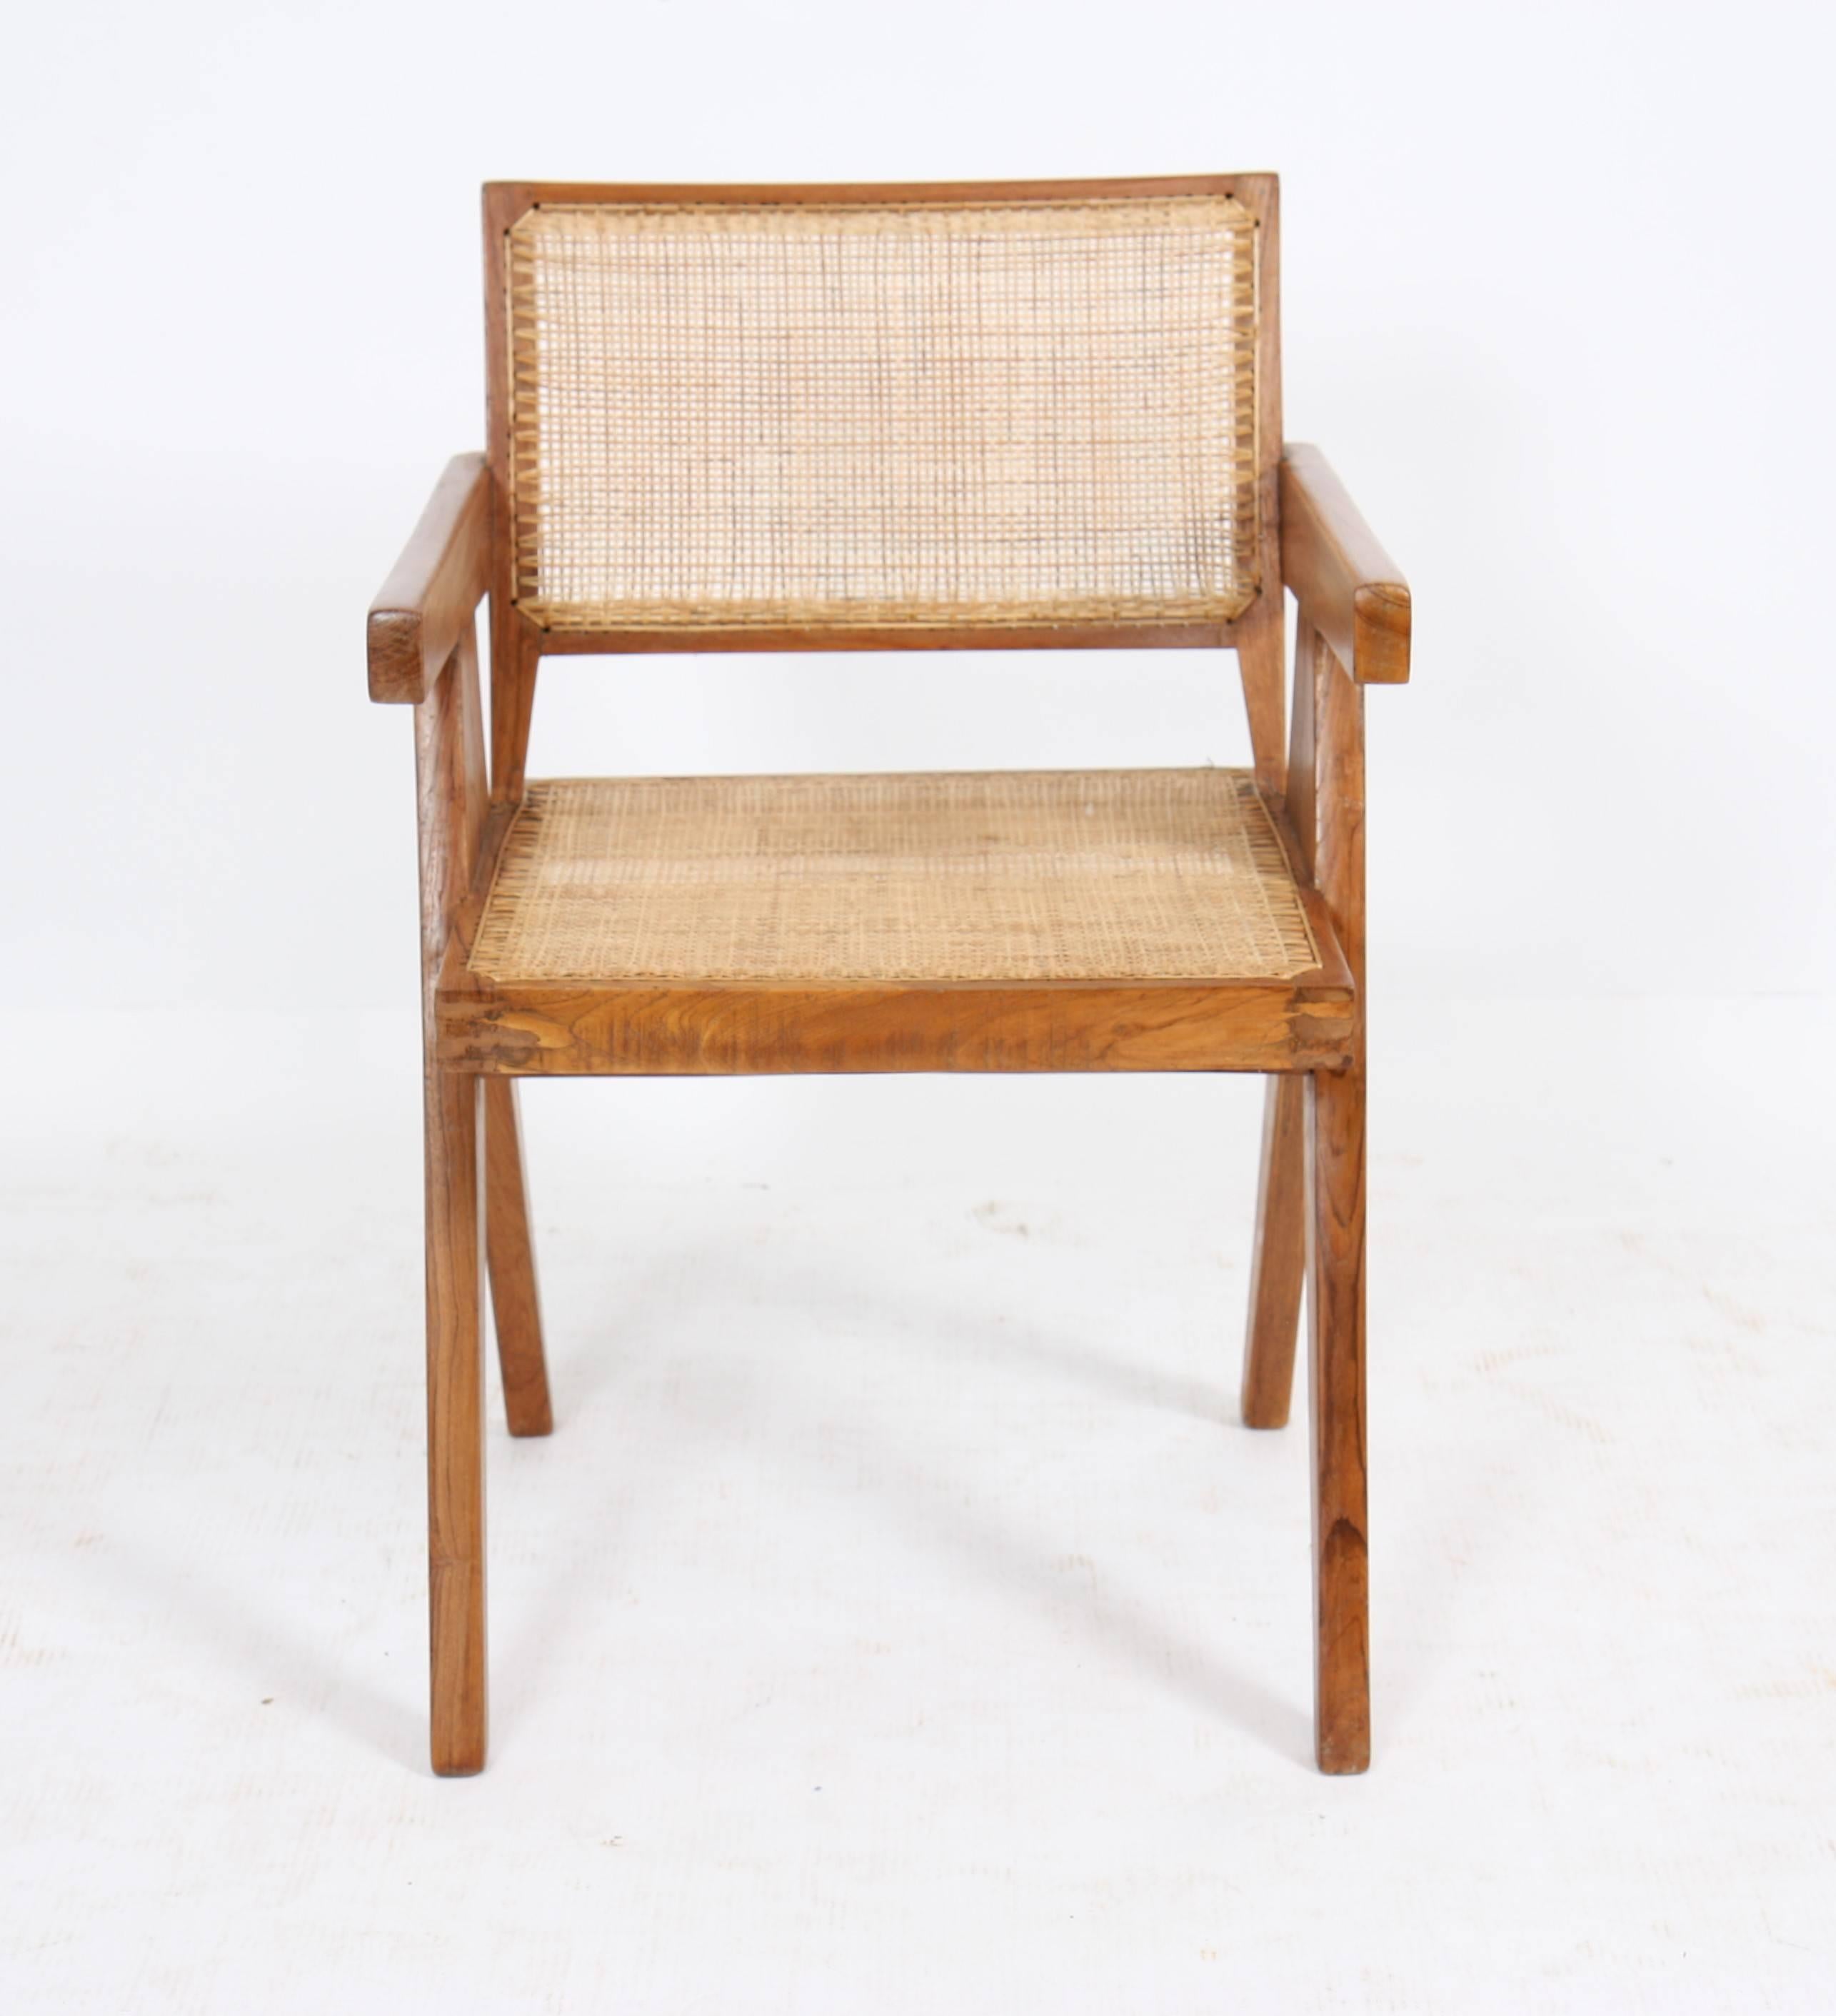 pierre jeanneret chairs